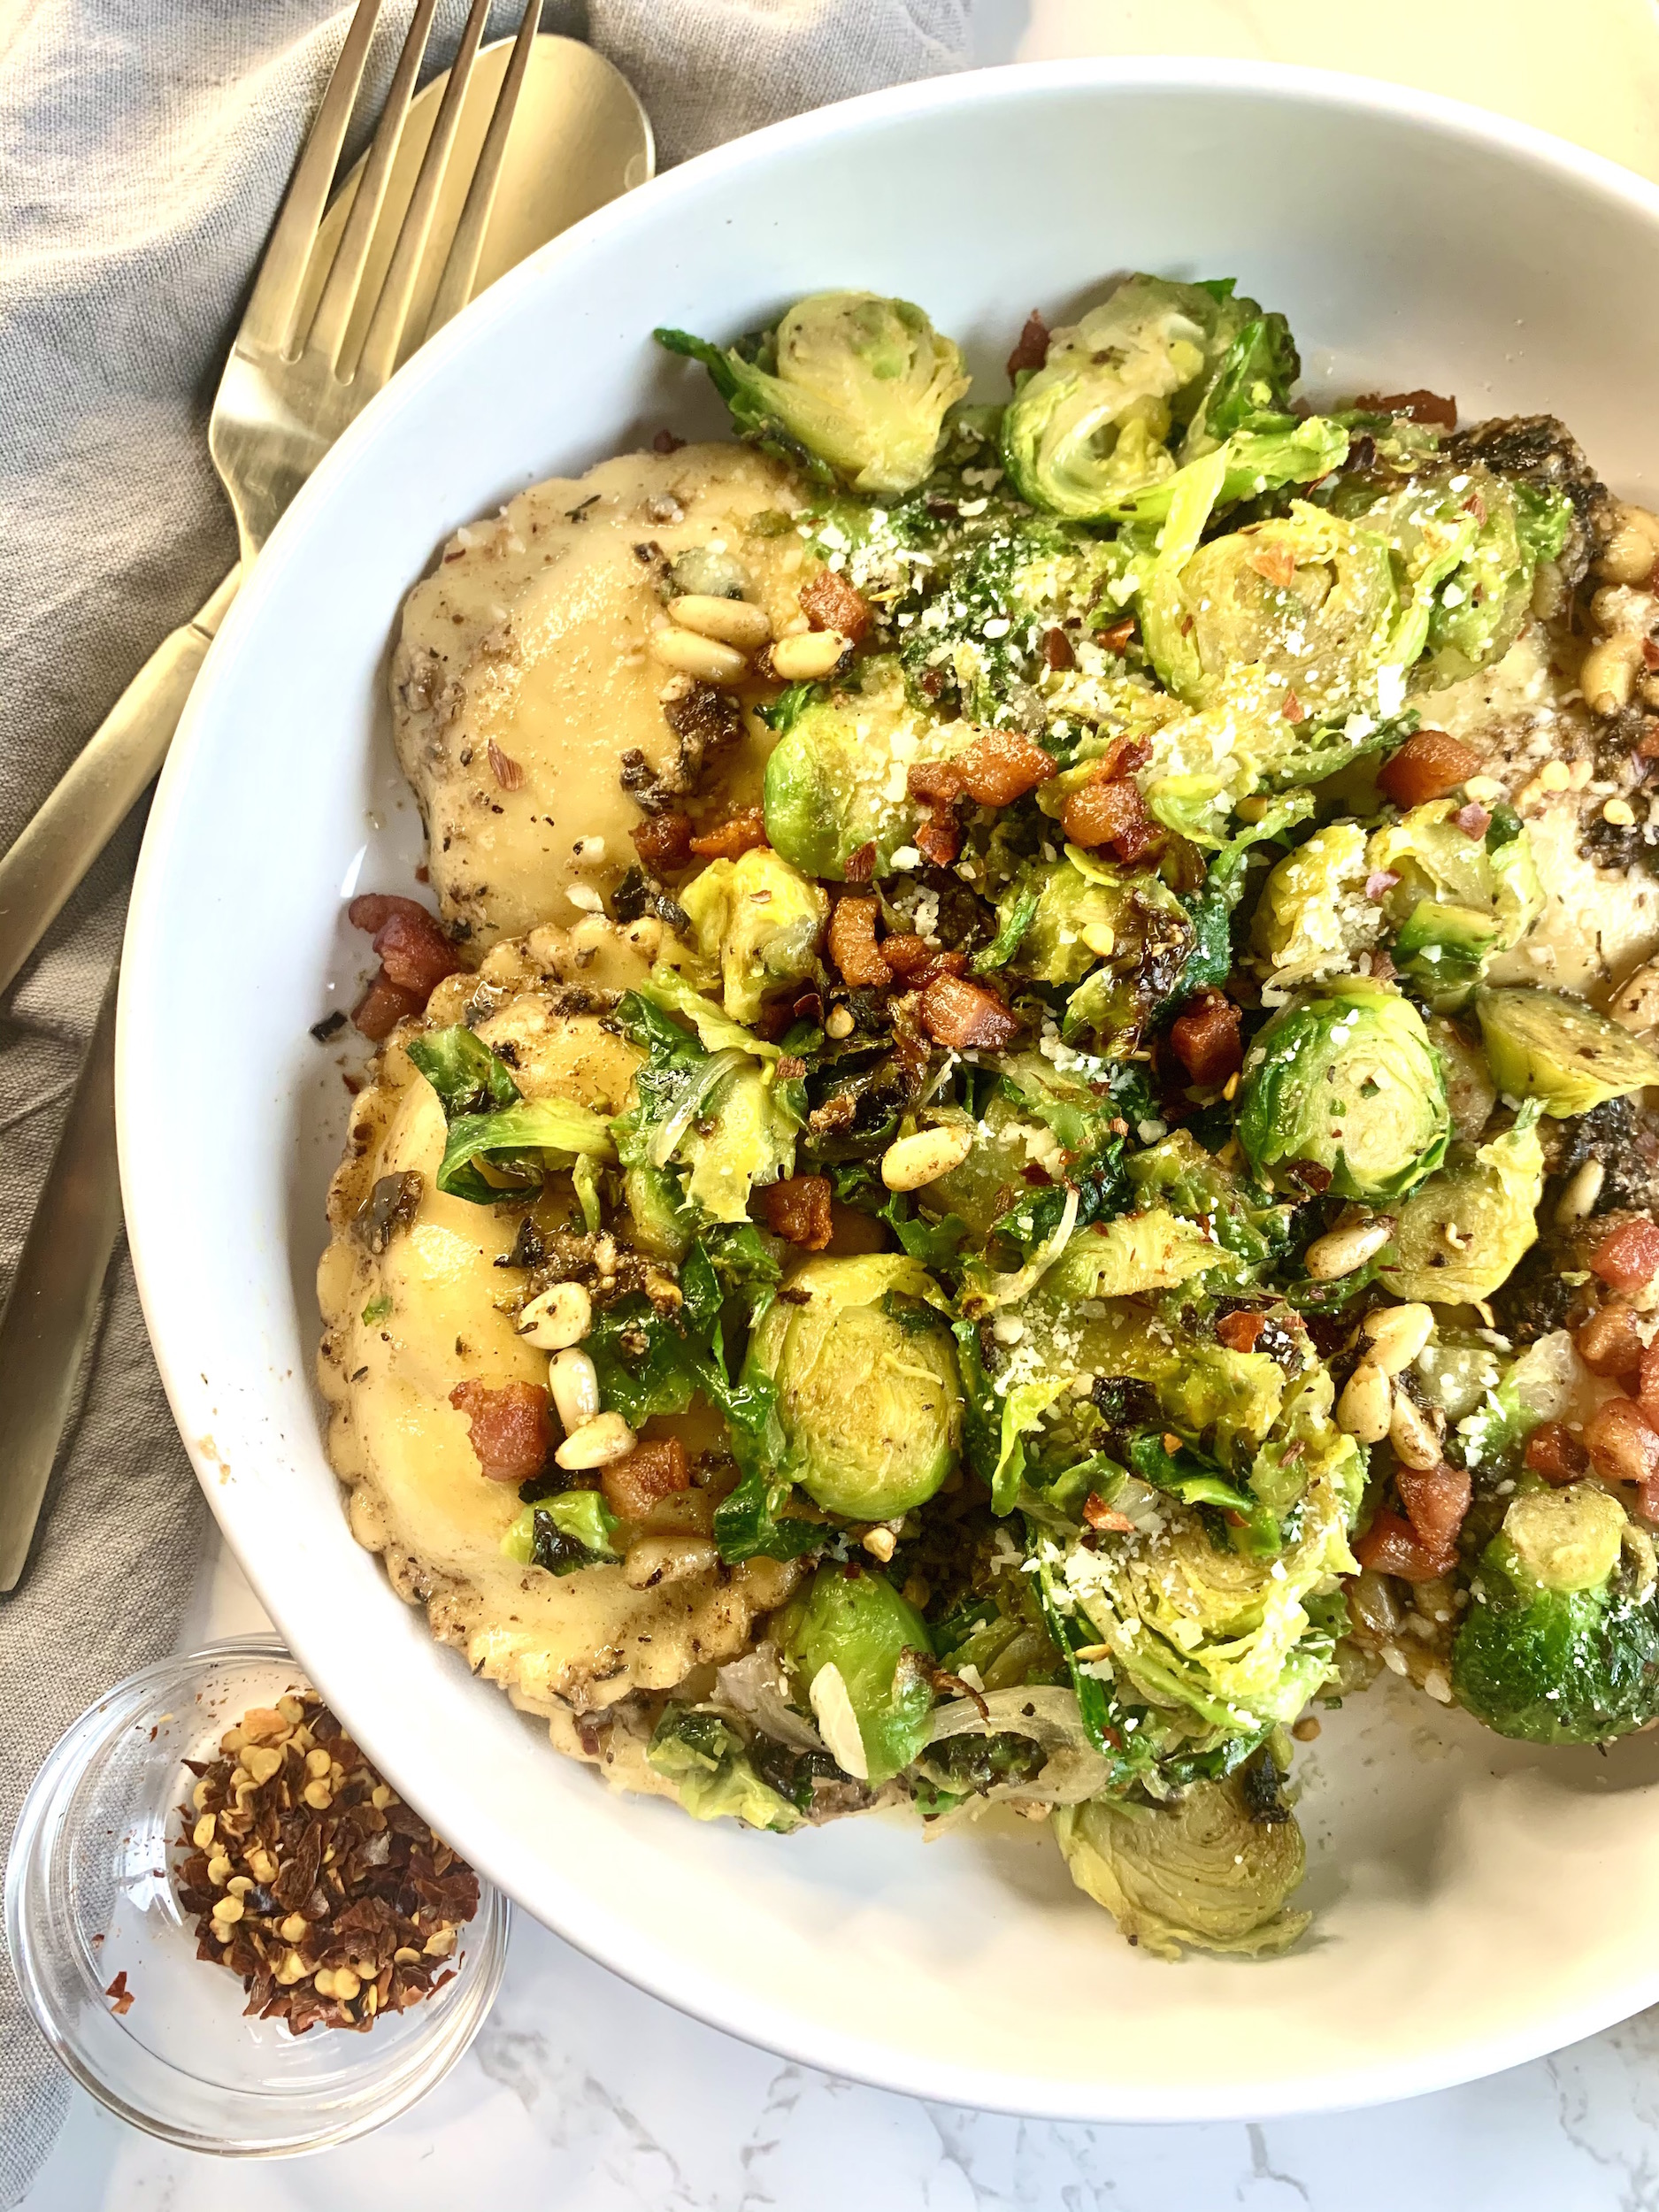 White plate with oval ravioli topped with shredded brussels sprouts and crispy pancetta.